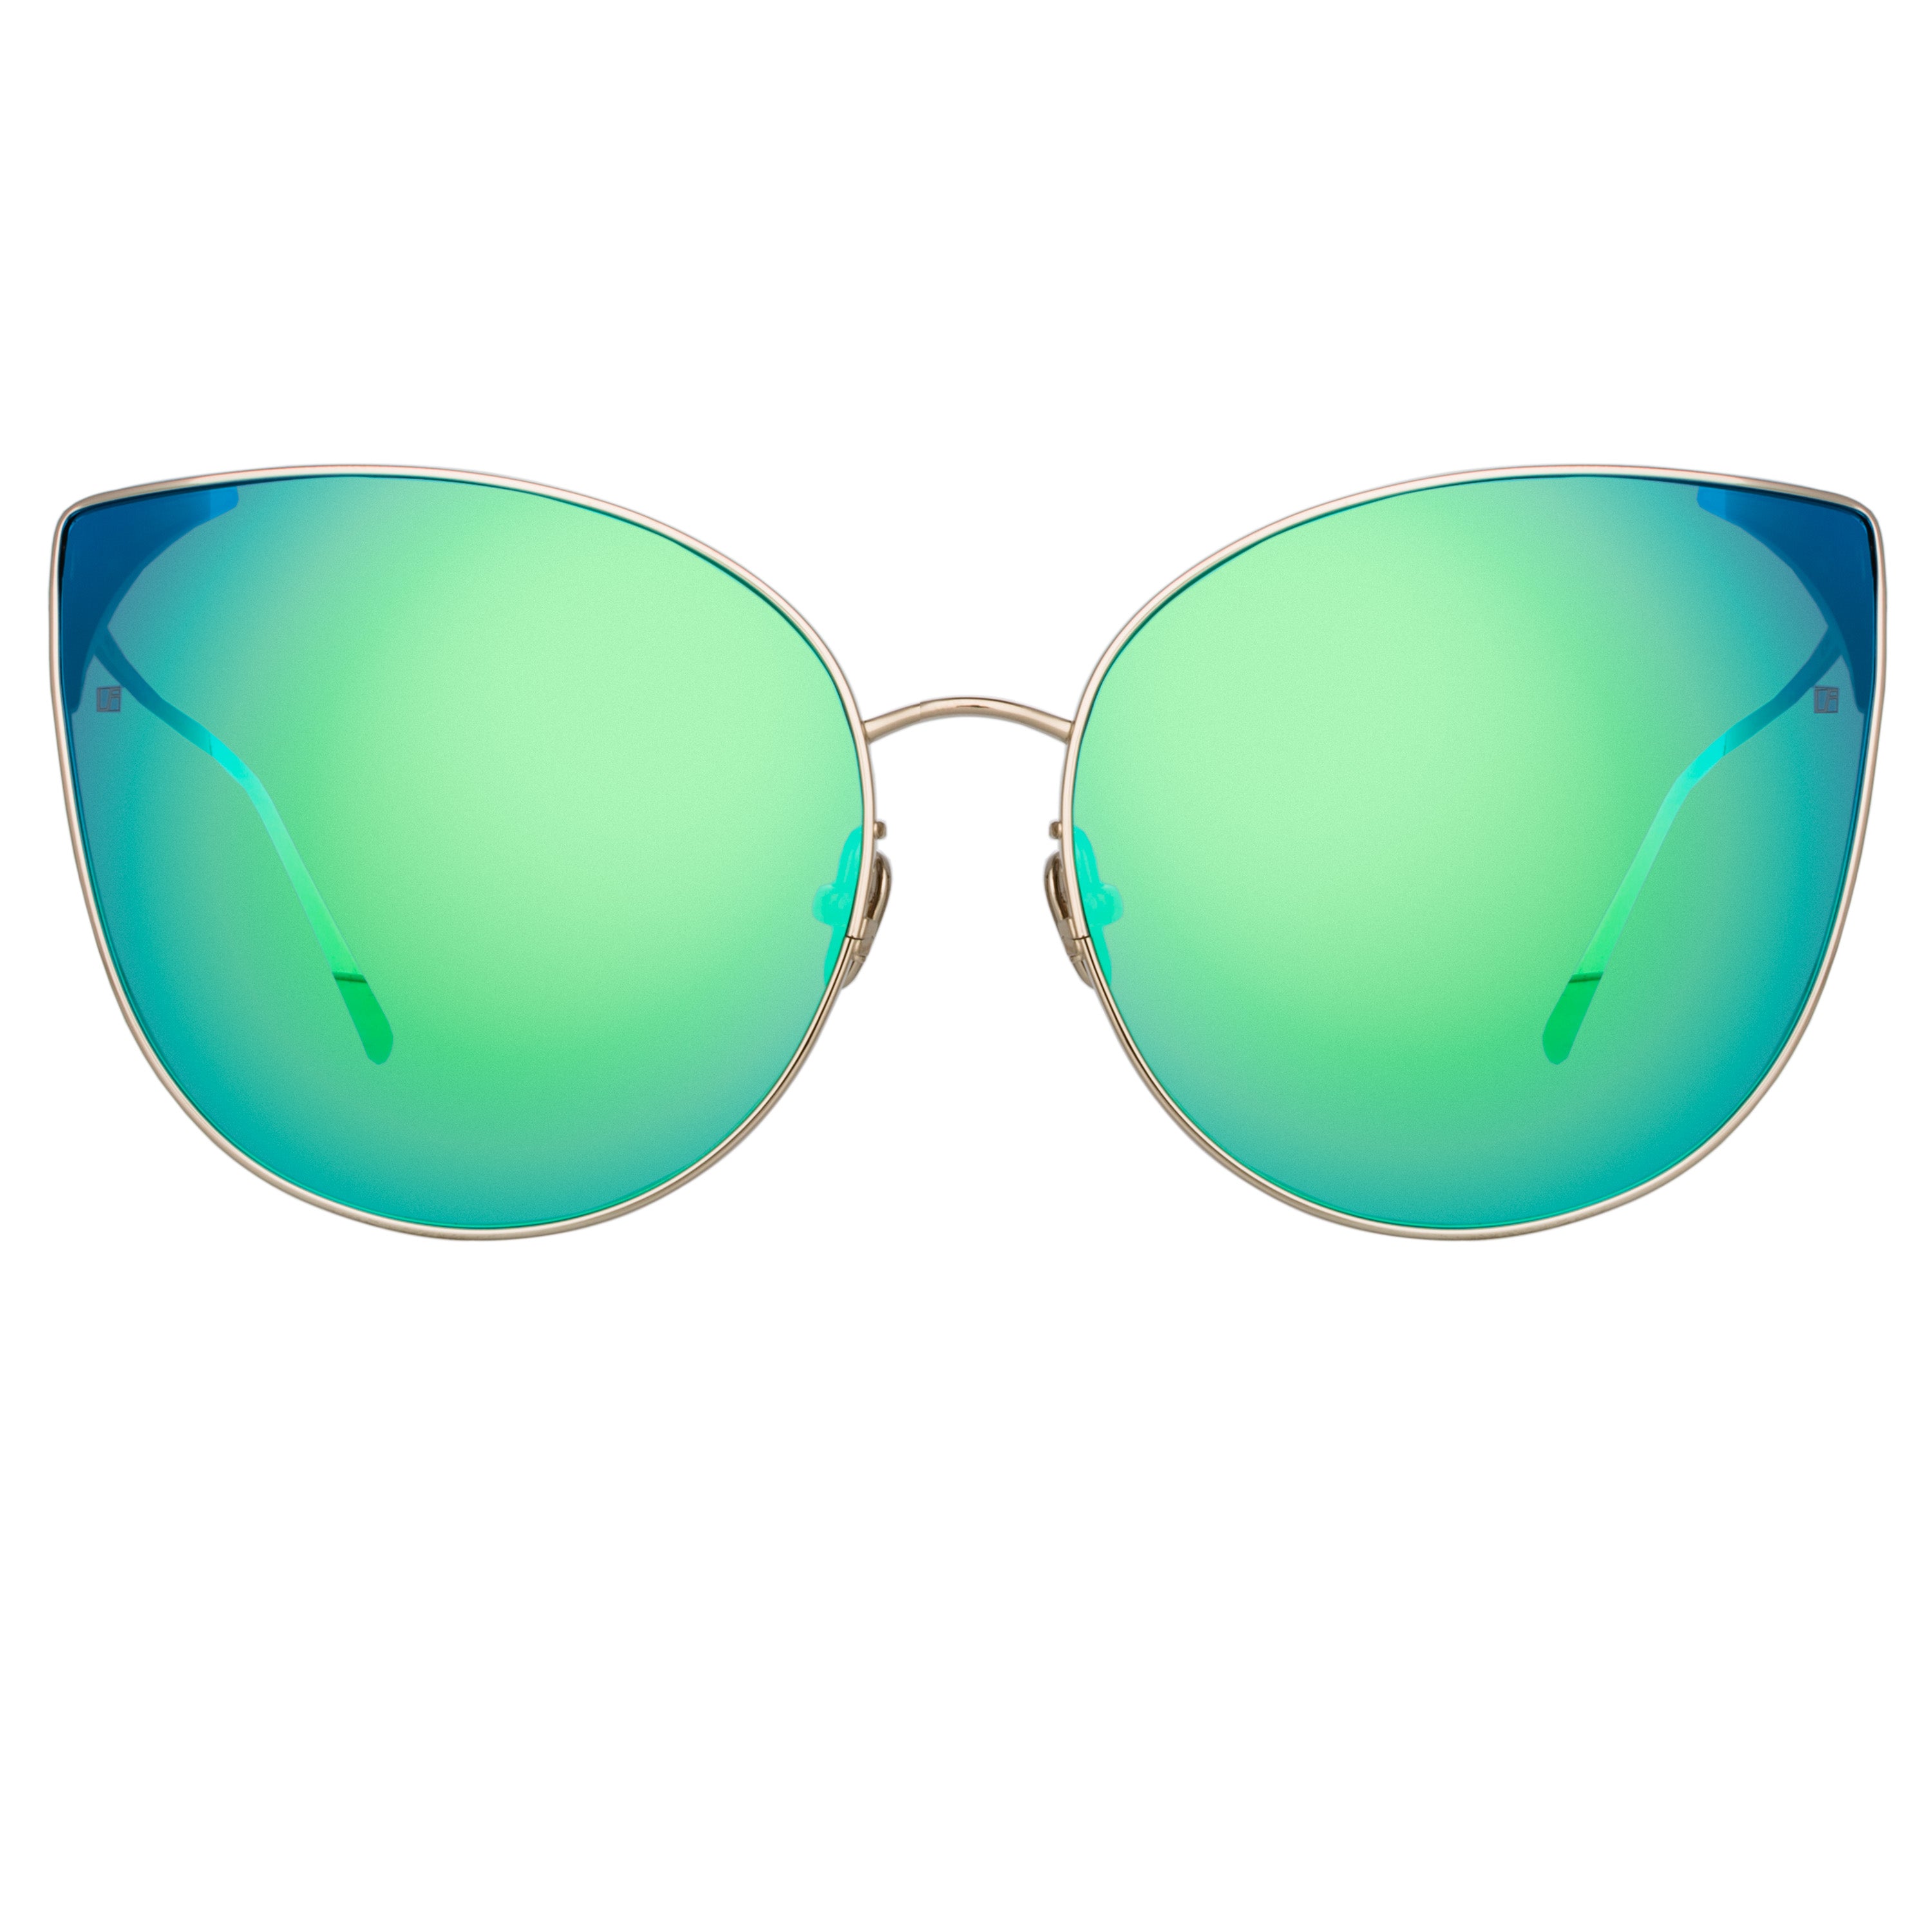 Flyer Cat Eye Sunglasses in Light Gold and Blue